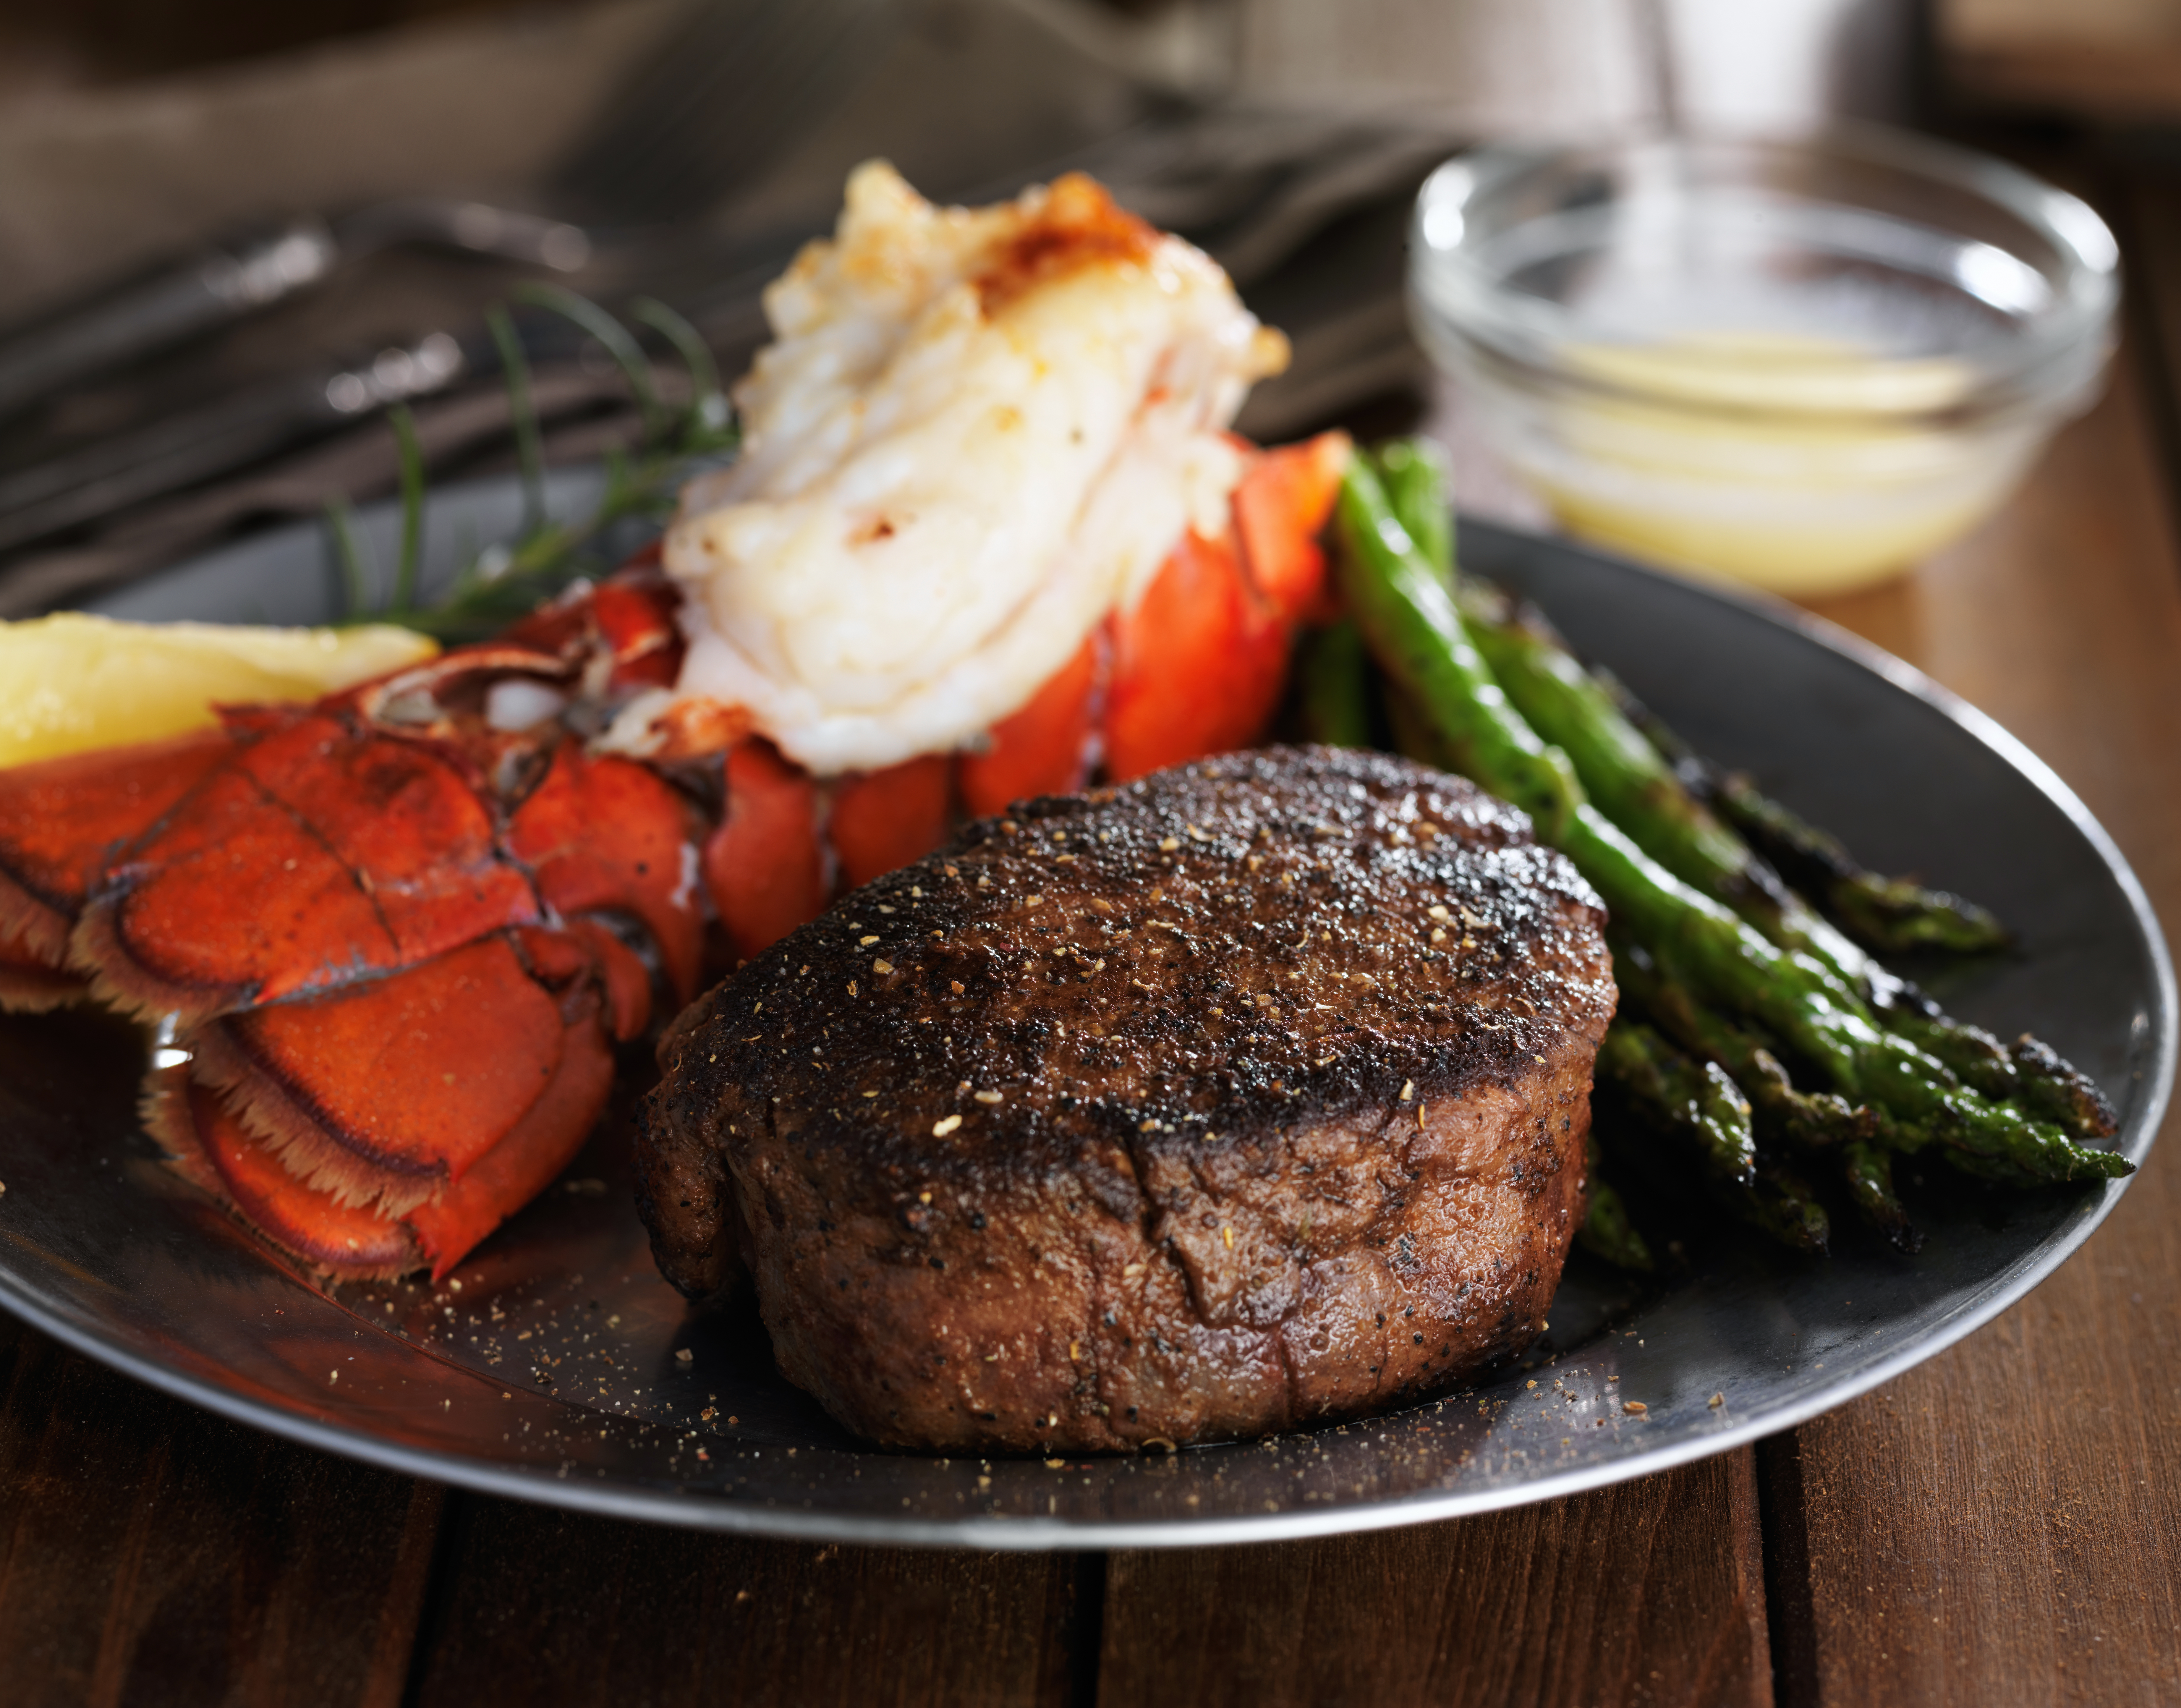 surf and turf meal with filet mignon, lobster tail and asparagus